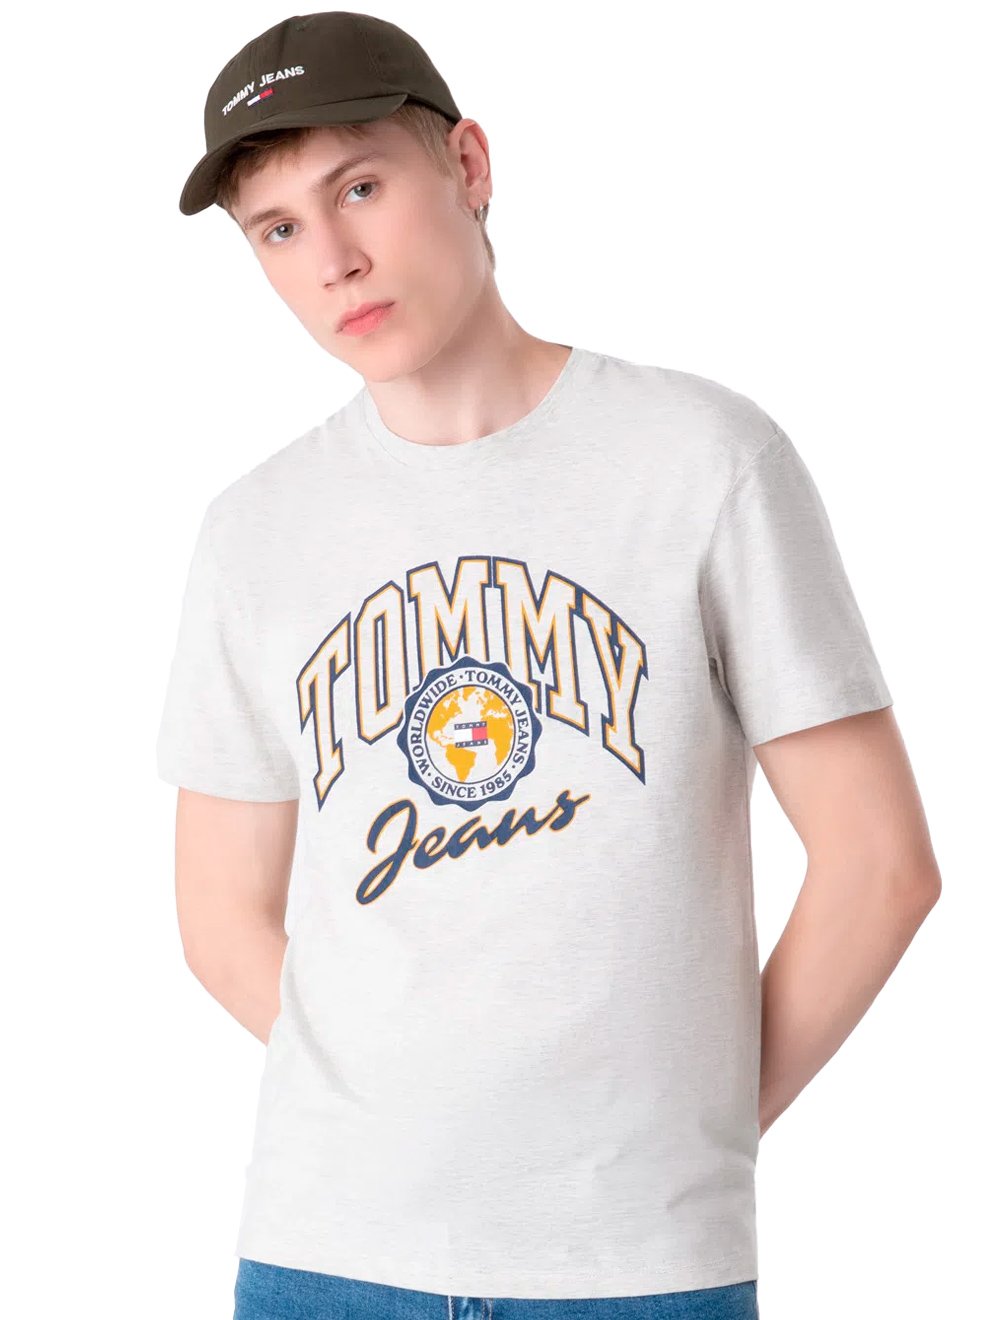 Camiseta Tommy Jeans Masculina Bold College Graphic Cinza Mescla